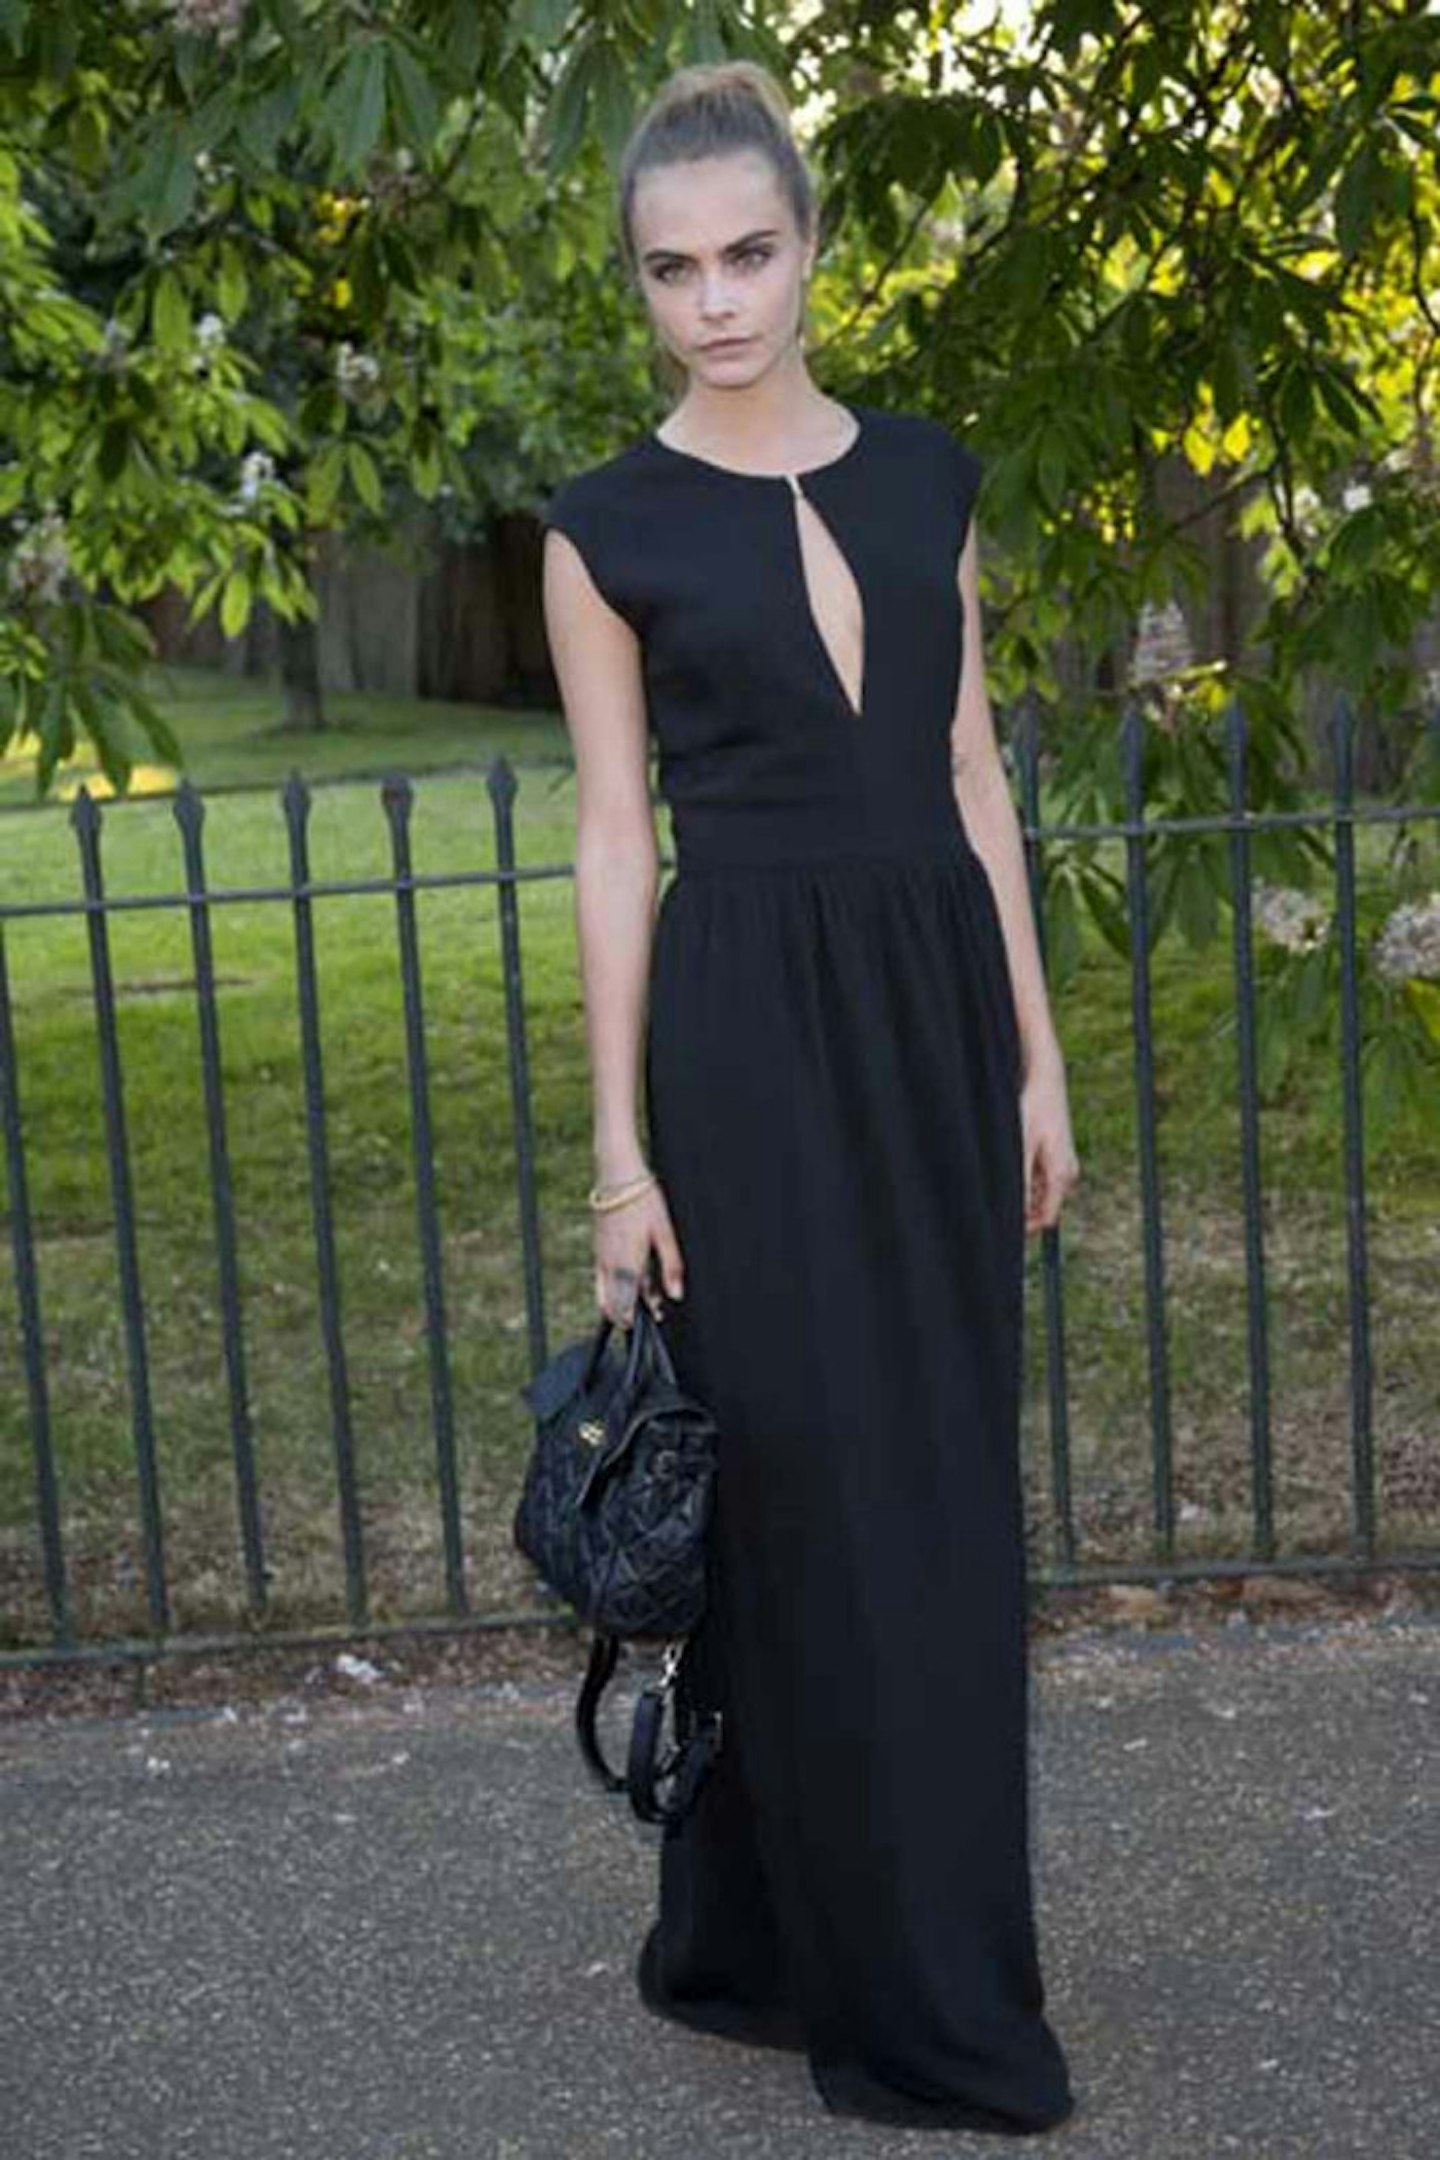 Cara Delevingne style mulberry black cut out dress